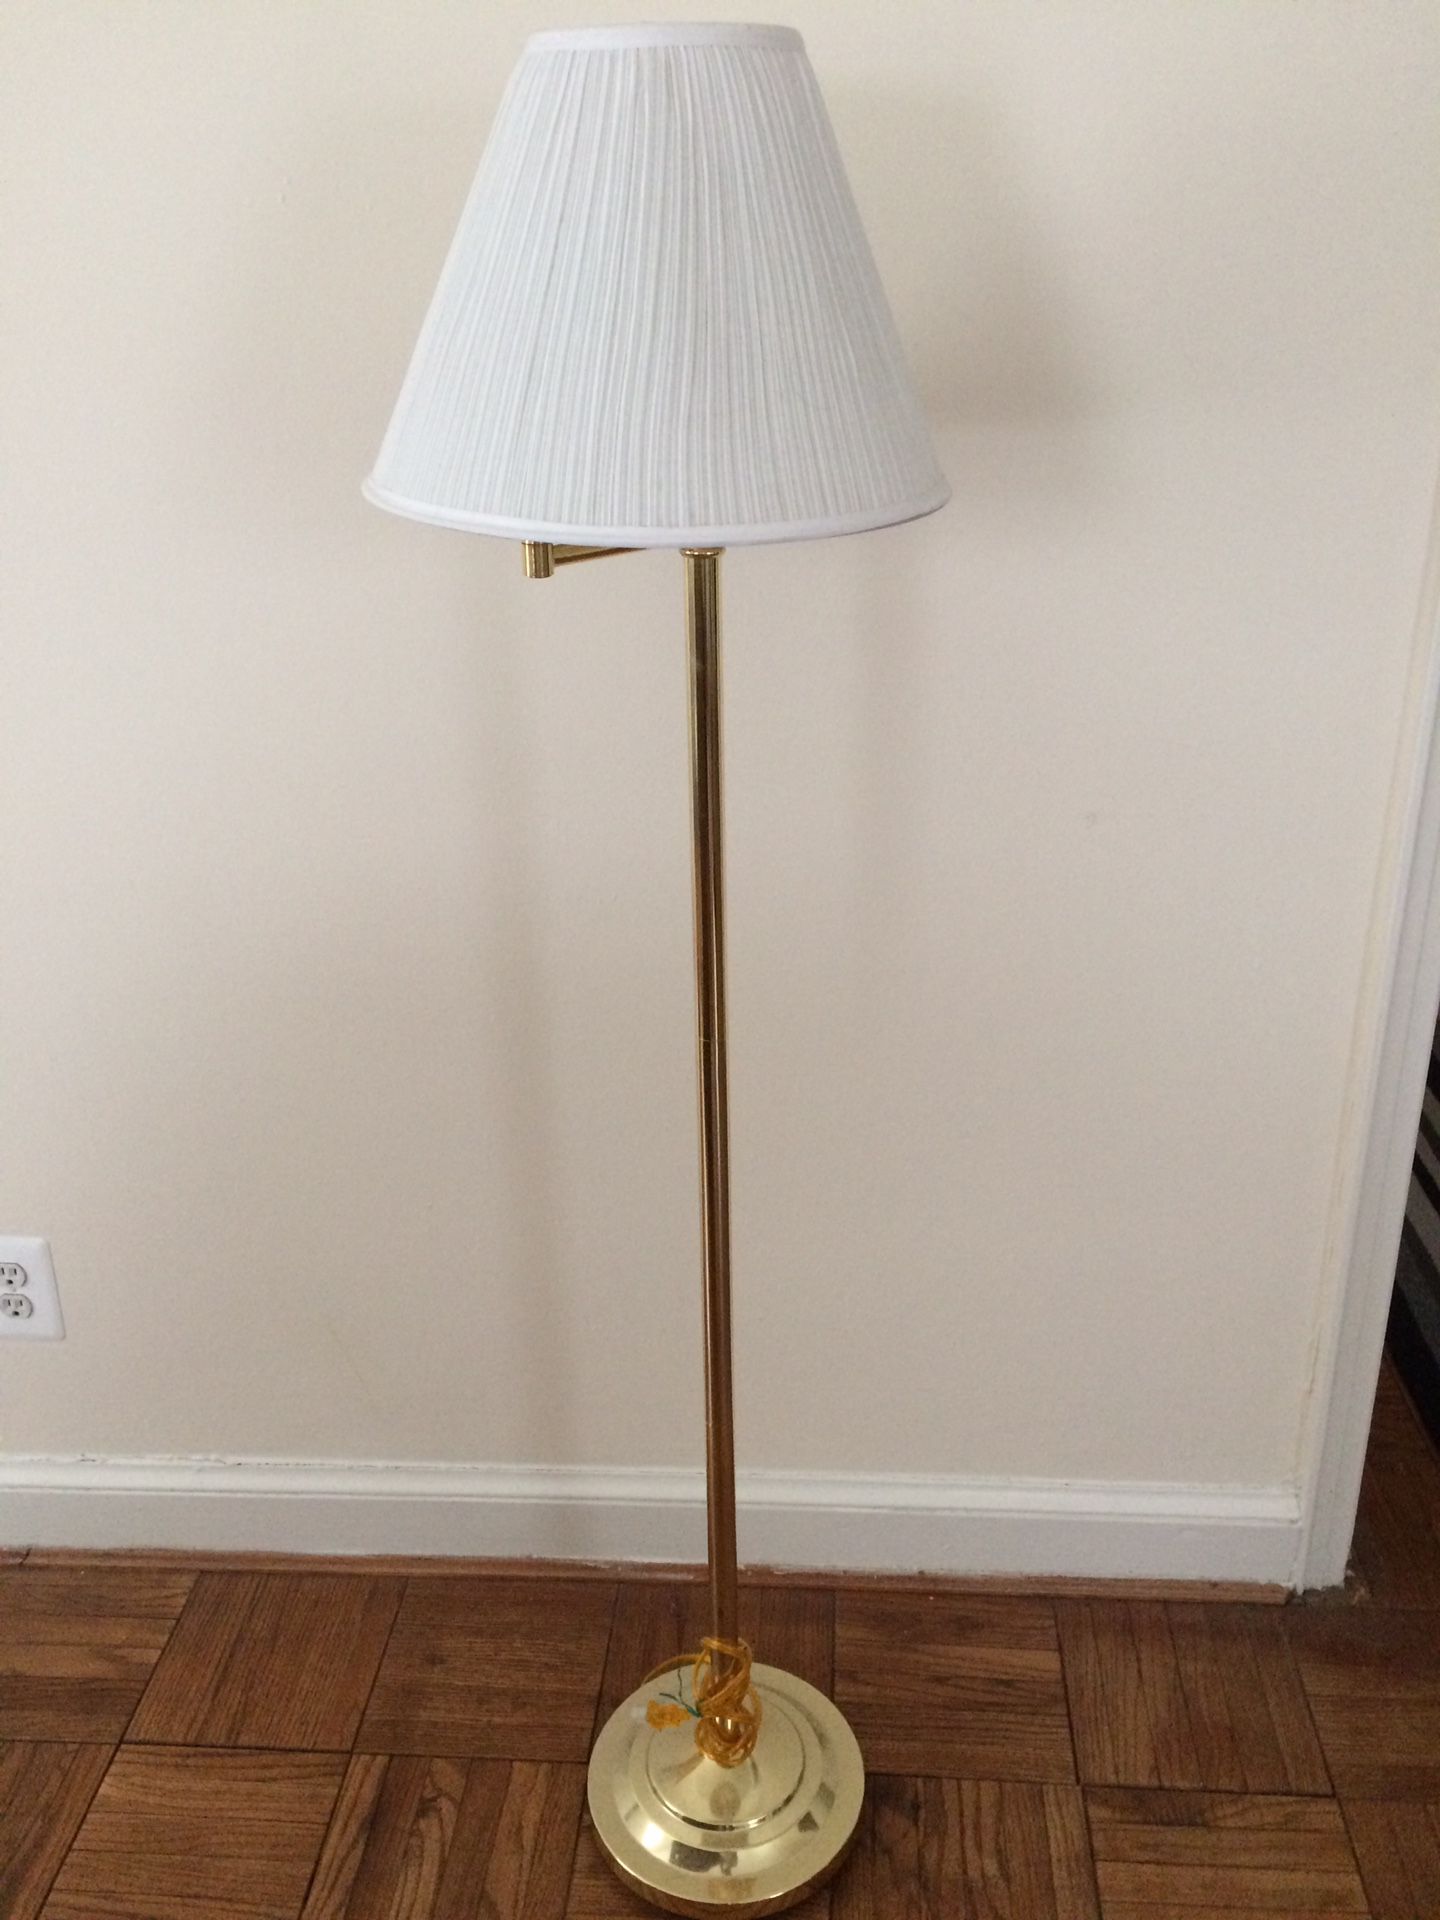 Lamp with Shade about 5 feet tall